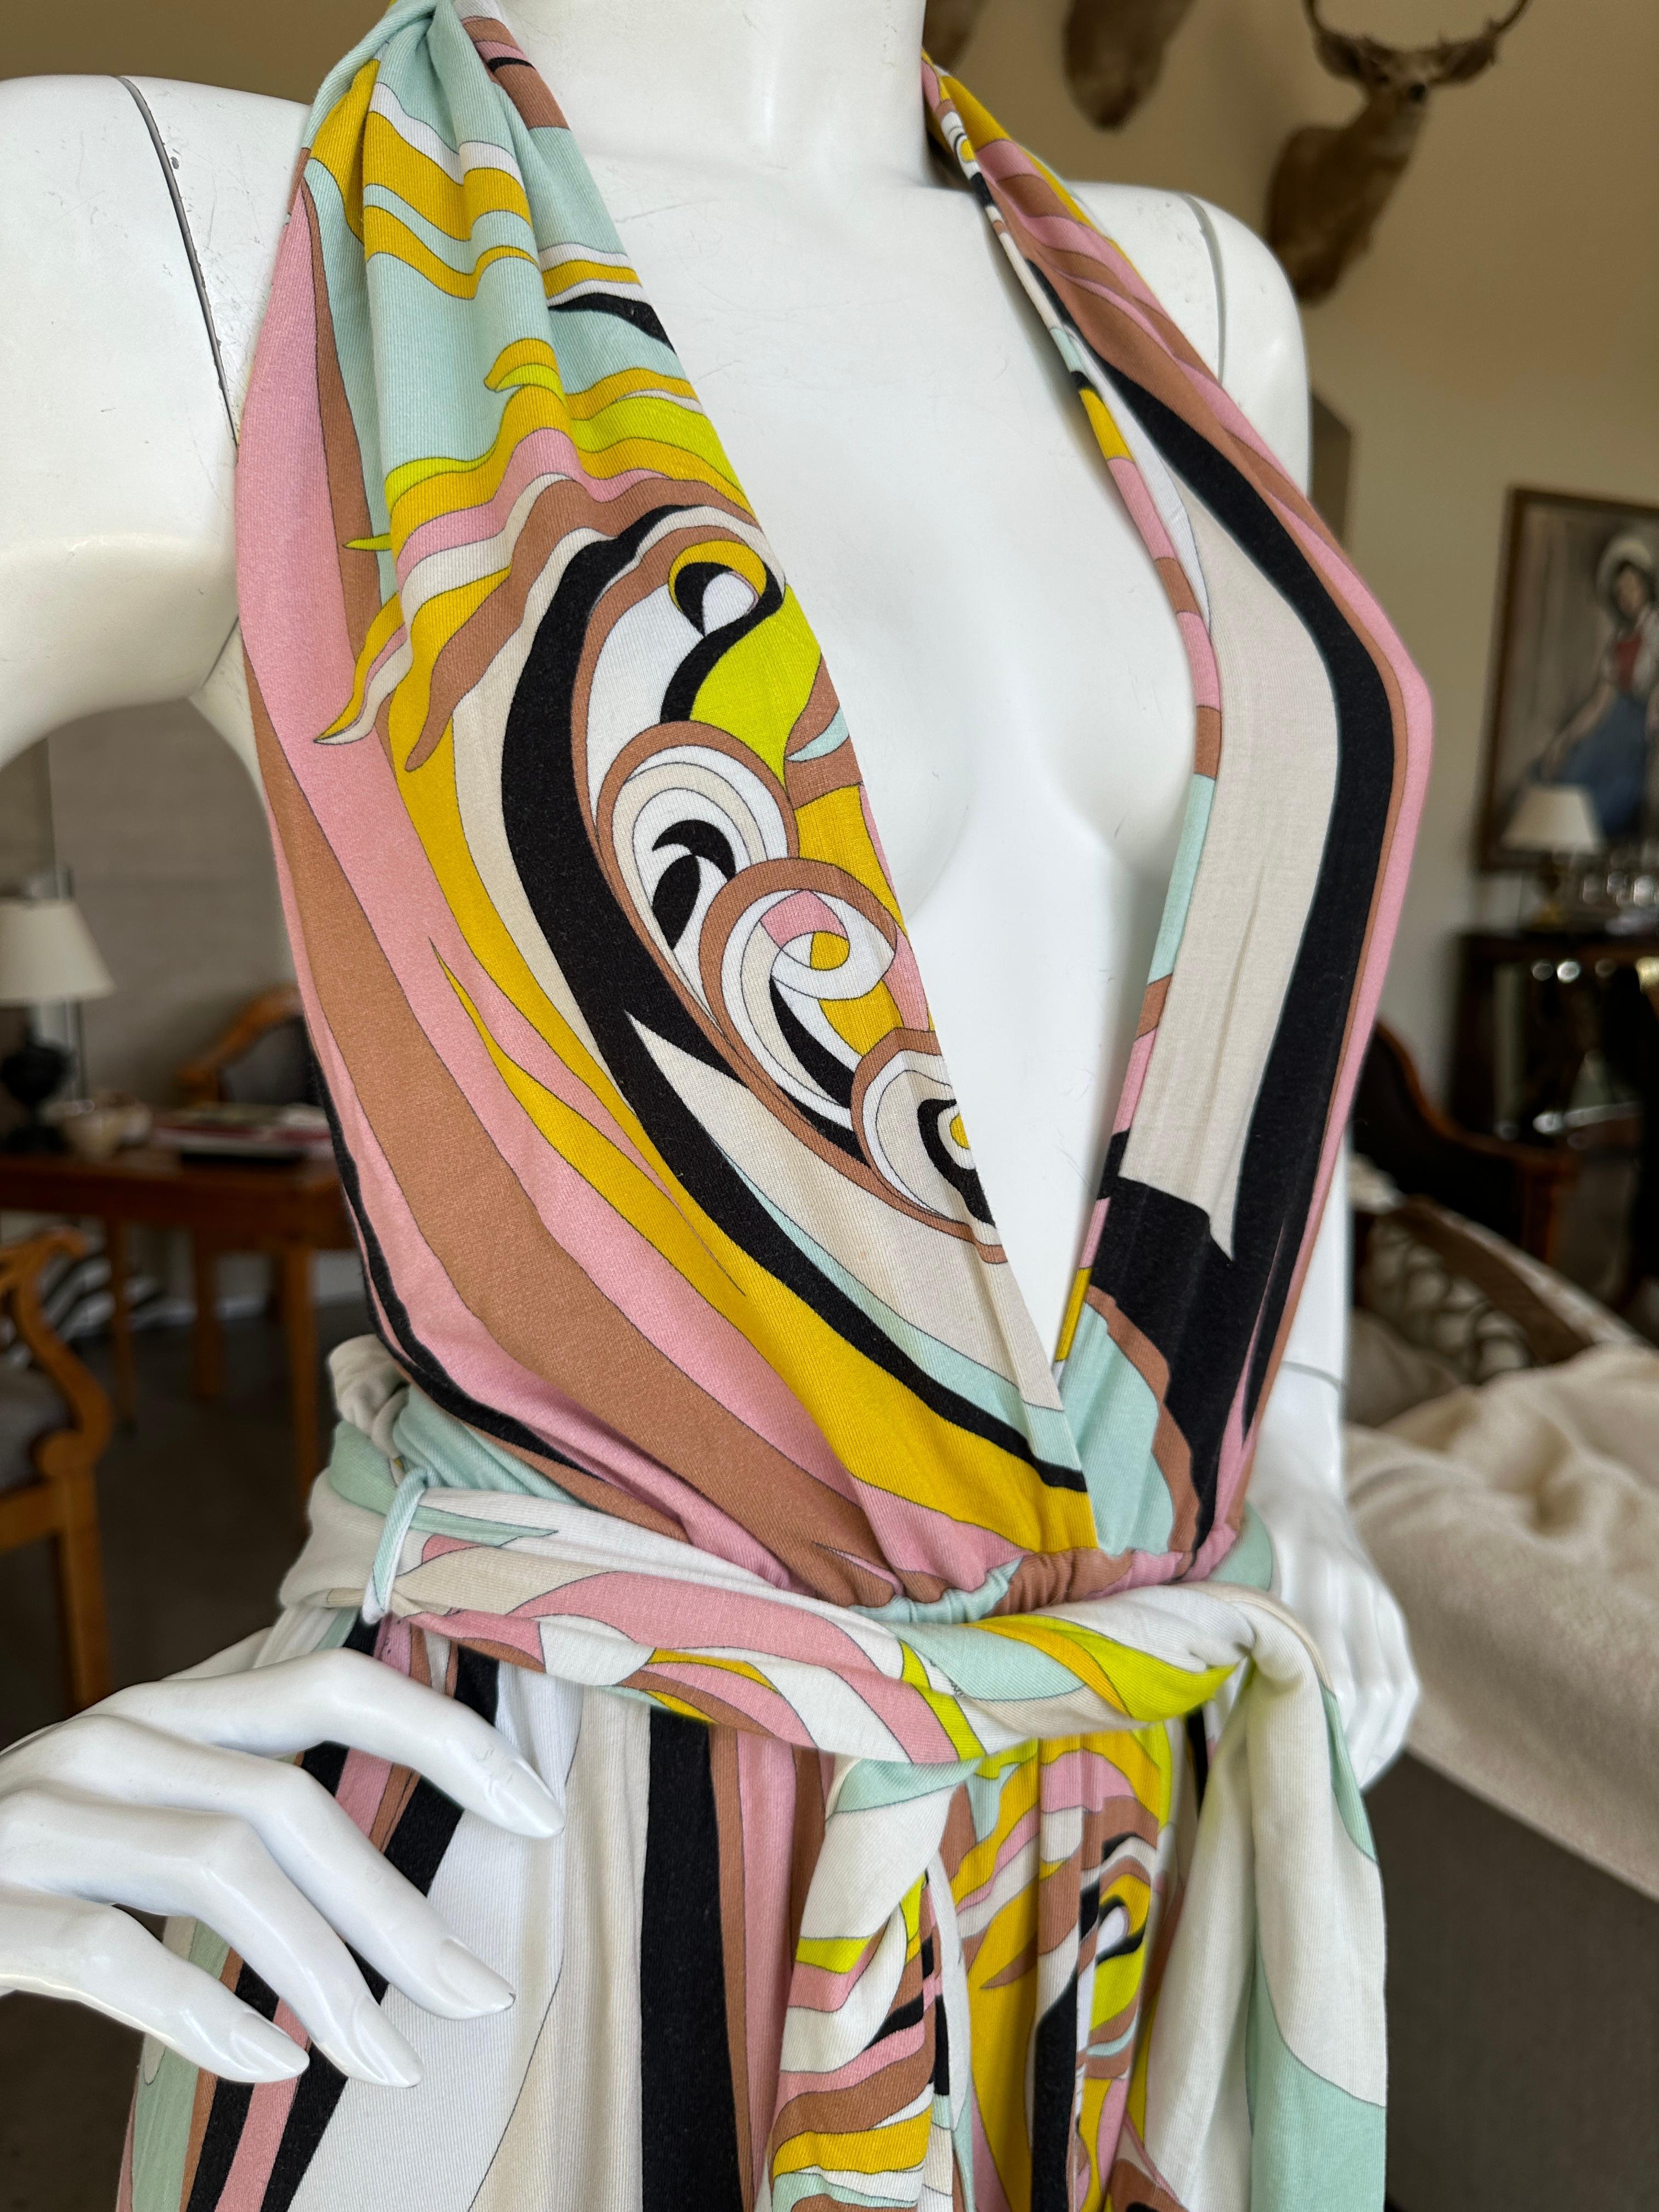 Emilio Pucci Plunging Backless Tie Back Maxi Dress with Sash Belt.
Perfect for summer travel.
Size 6
Bust 36